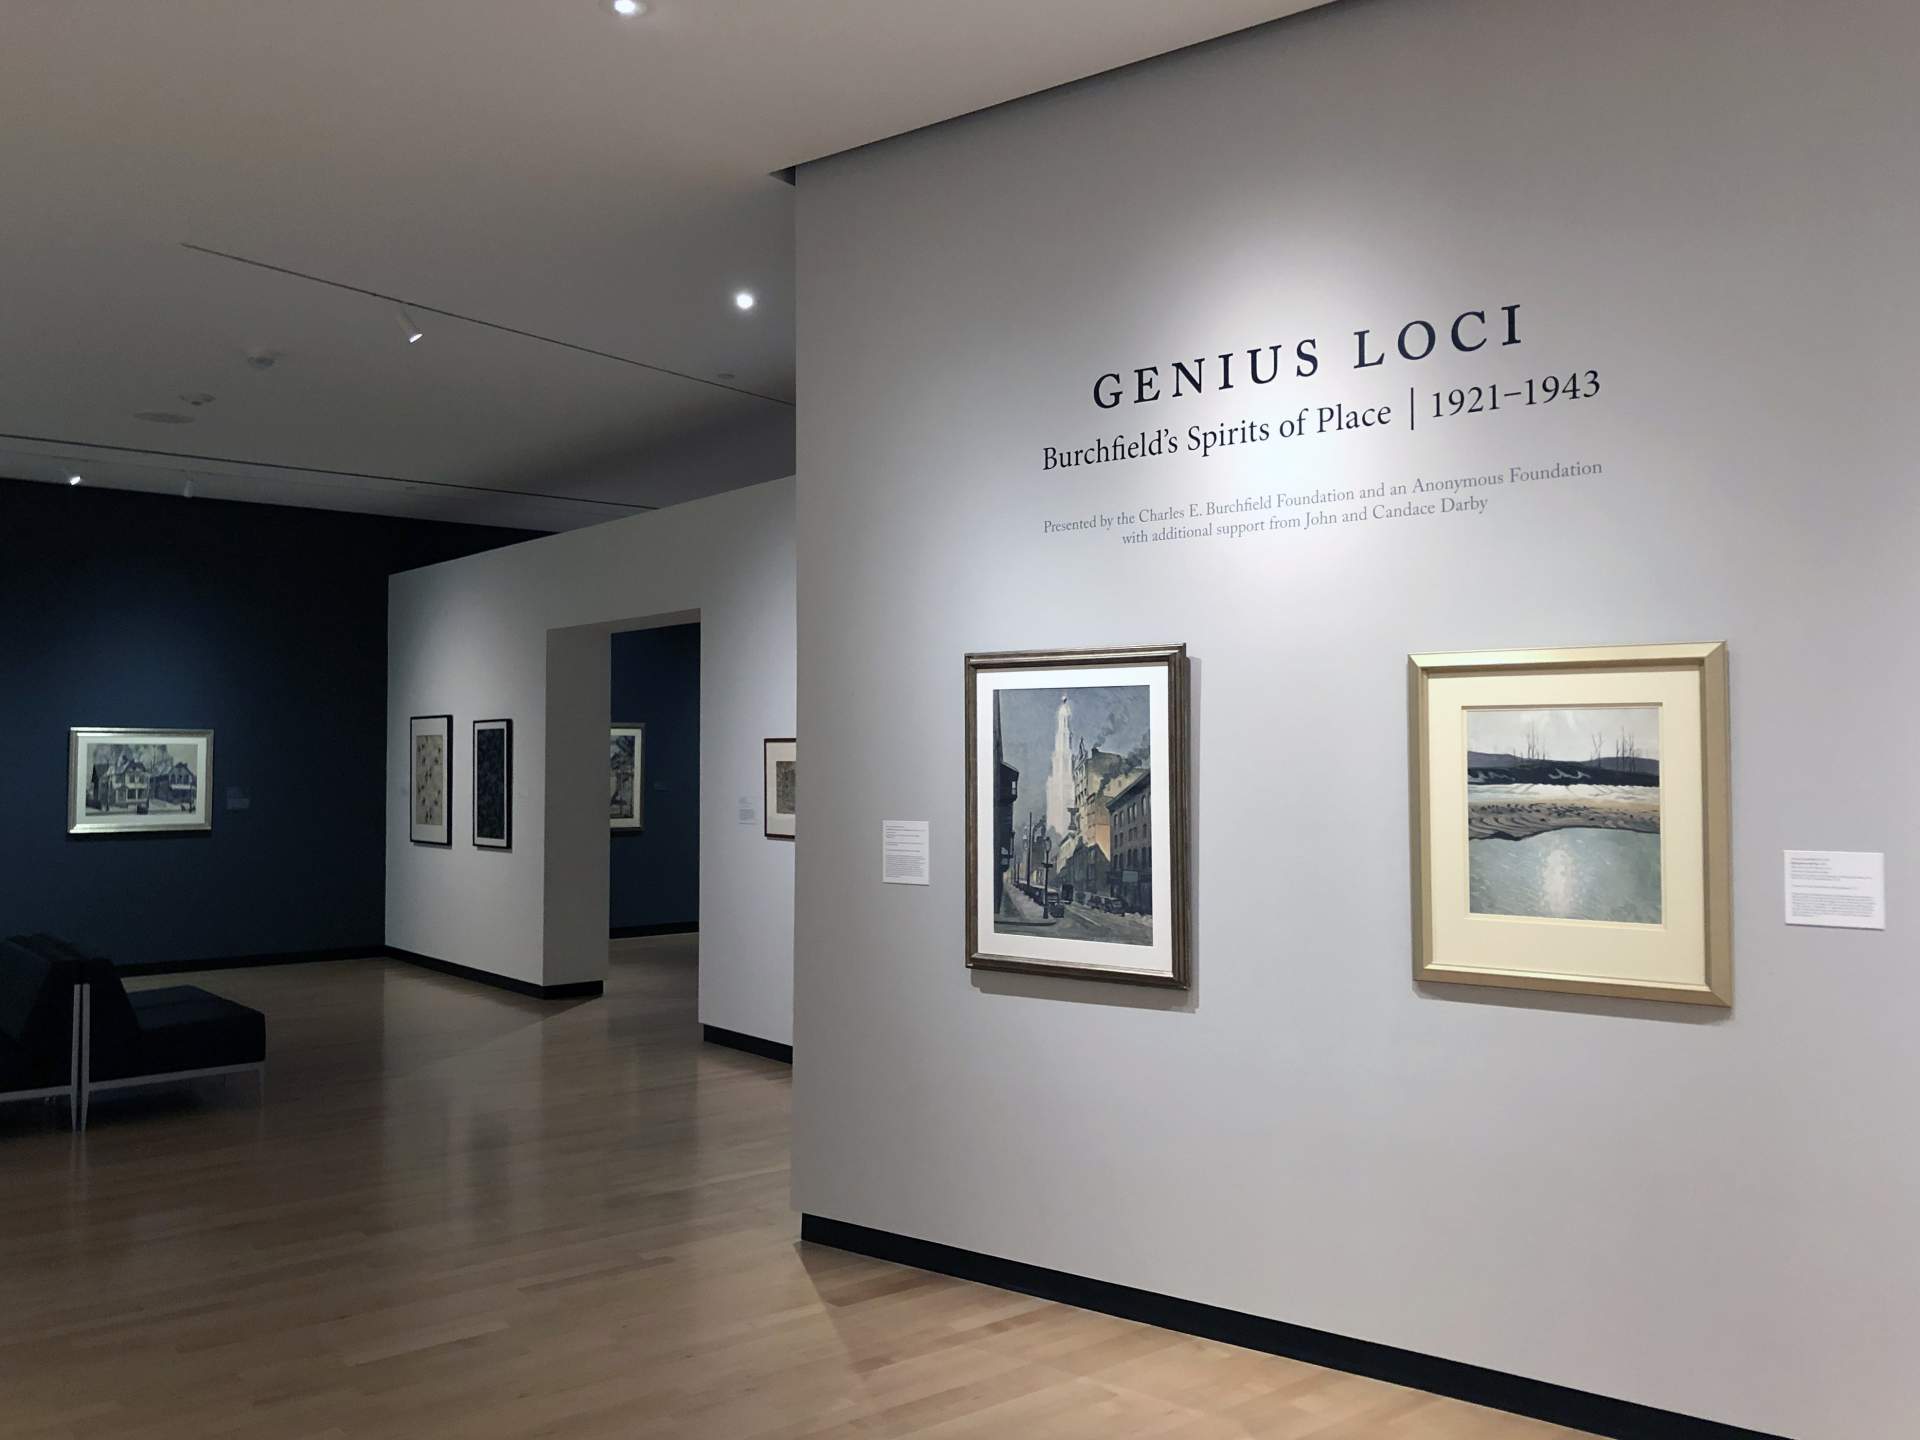 [Photograph for the exhibition "Genius Loci: Burchfield's Spirits of Place 1921-1943"]